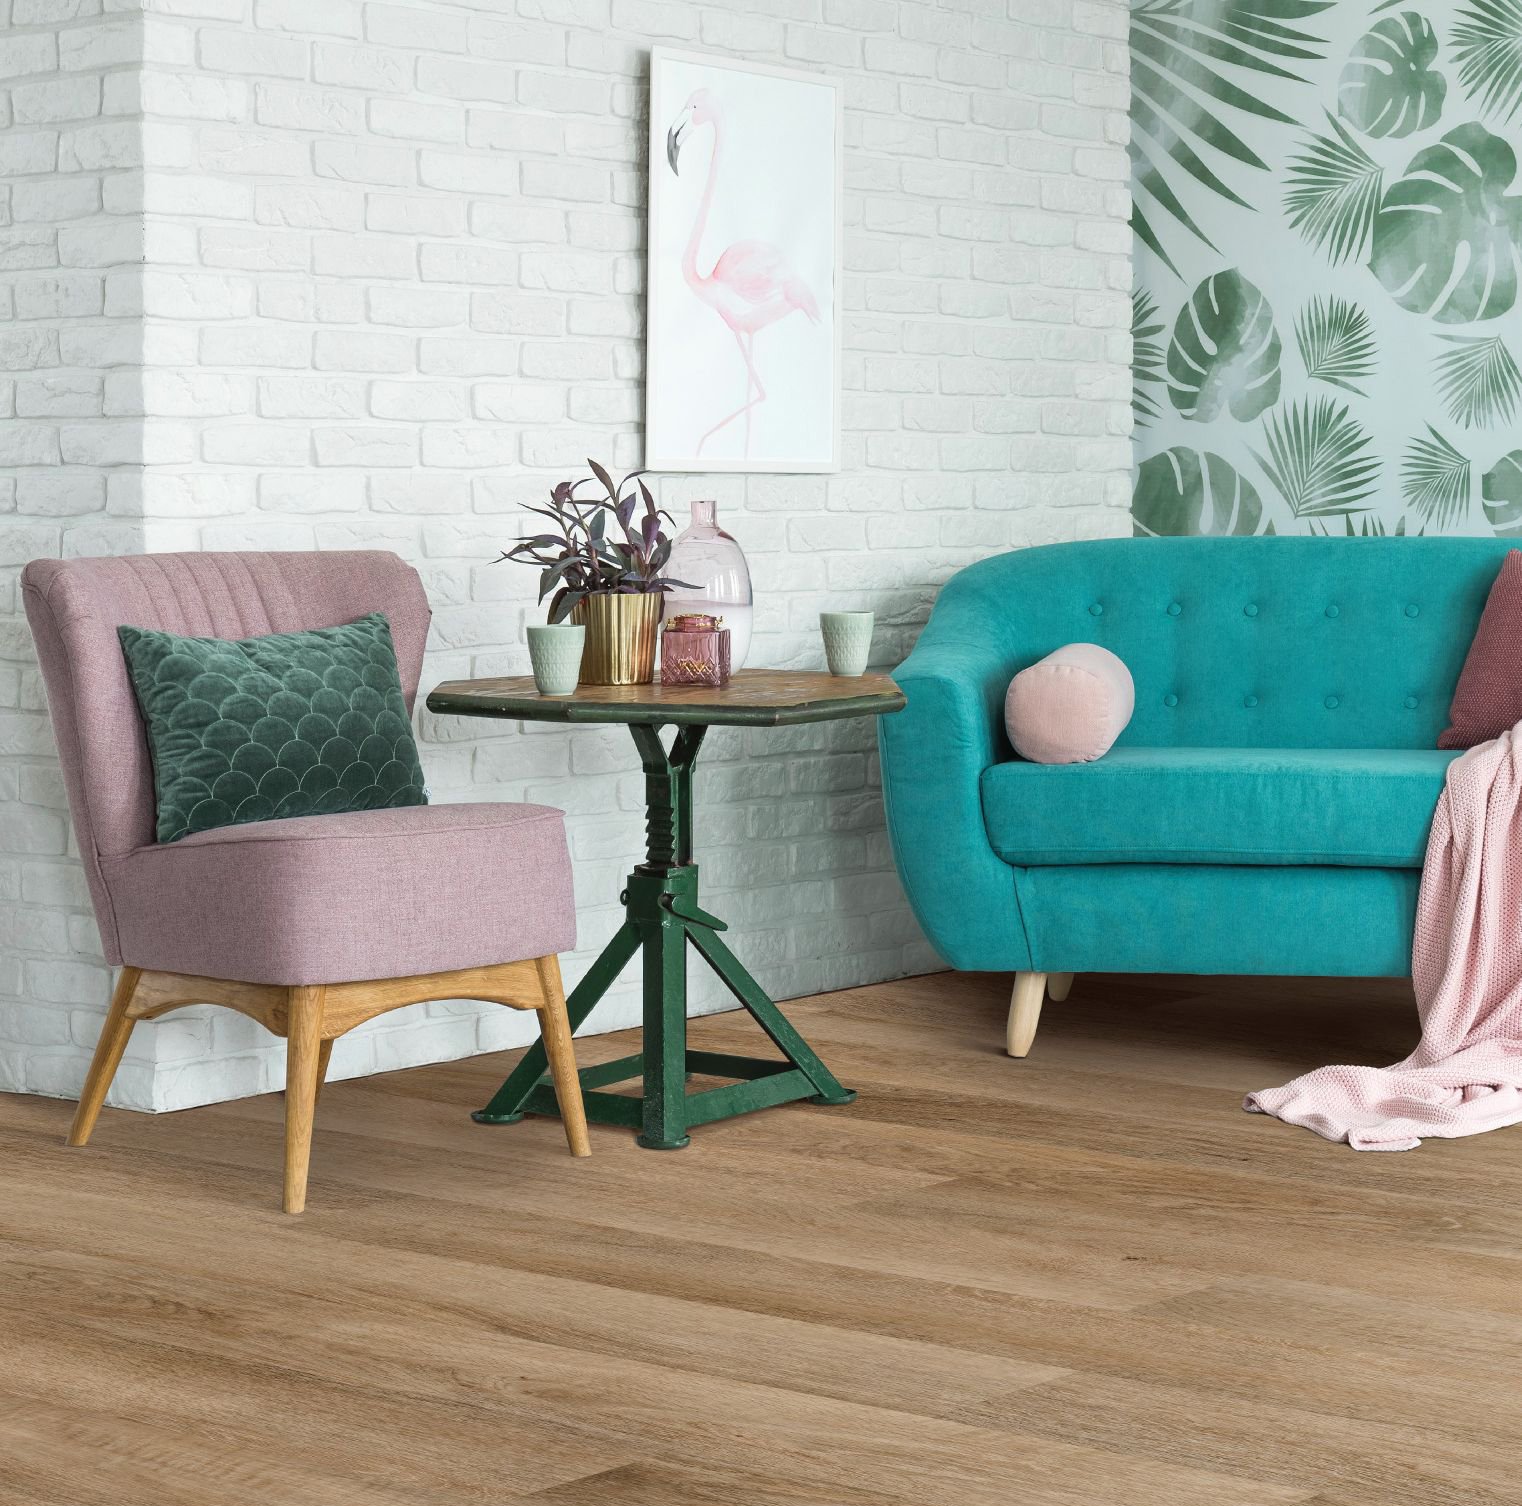 pink arm chair and teal couch on wood look flooring - B D Flooring Inc